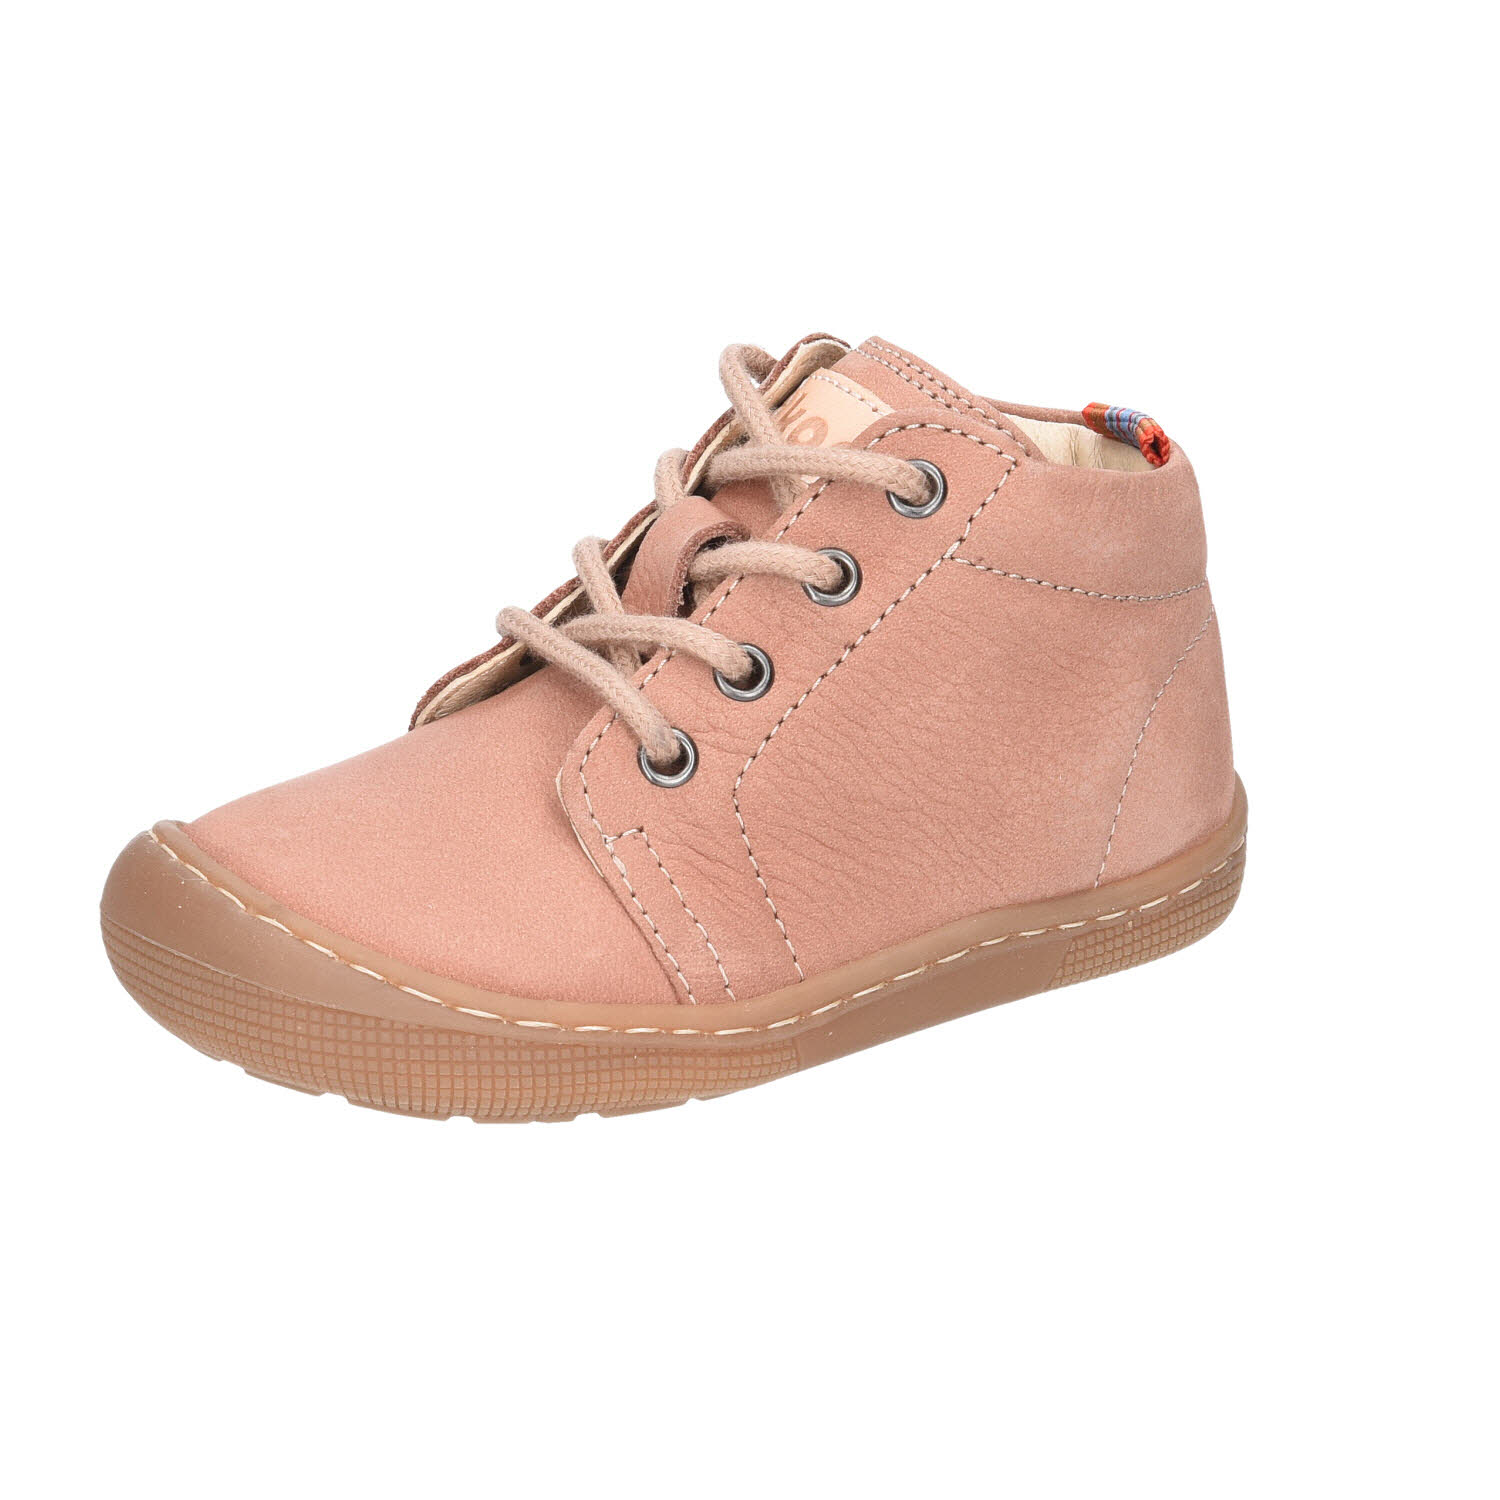 Koel Deli Barfuss Old Pink pink